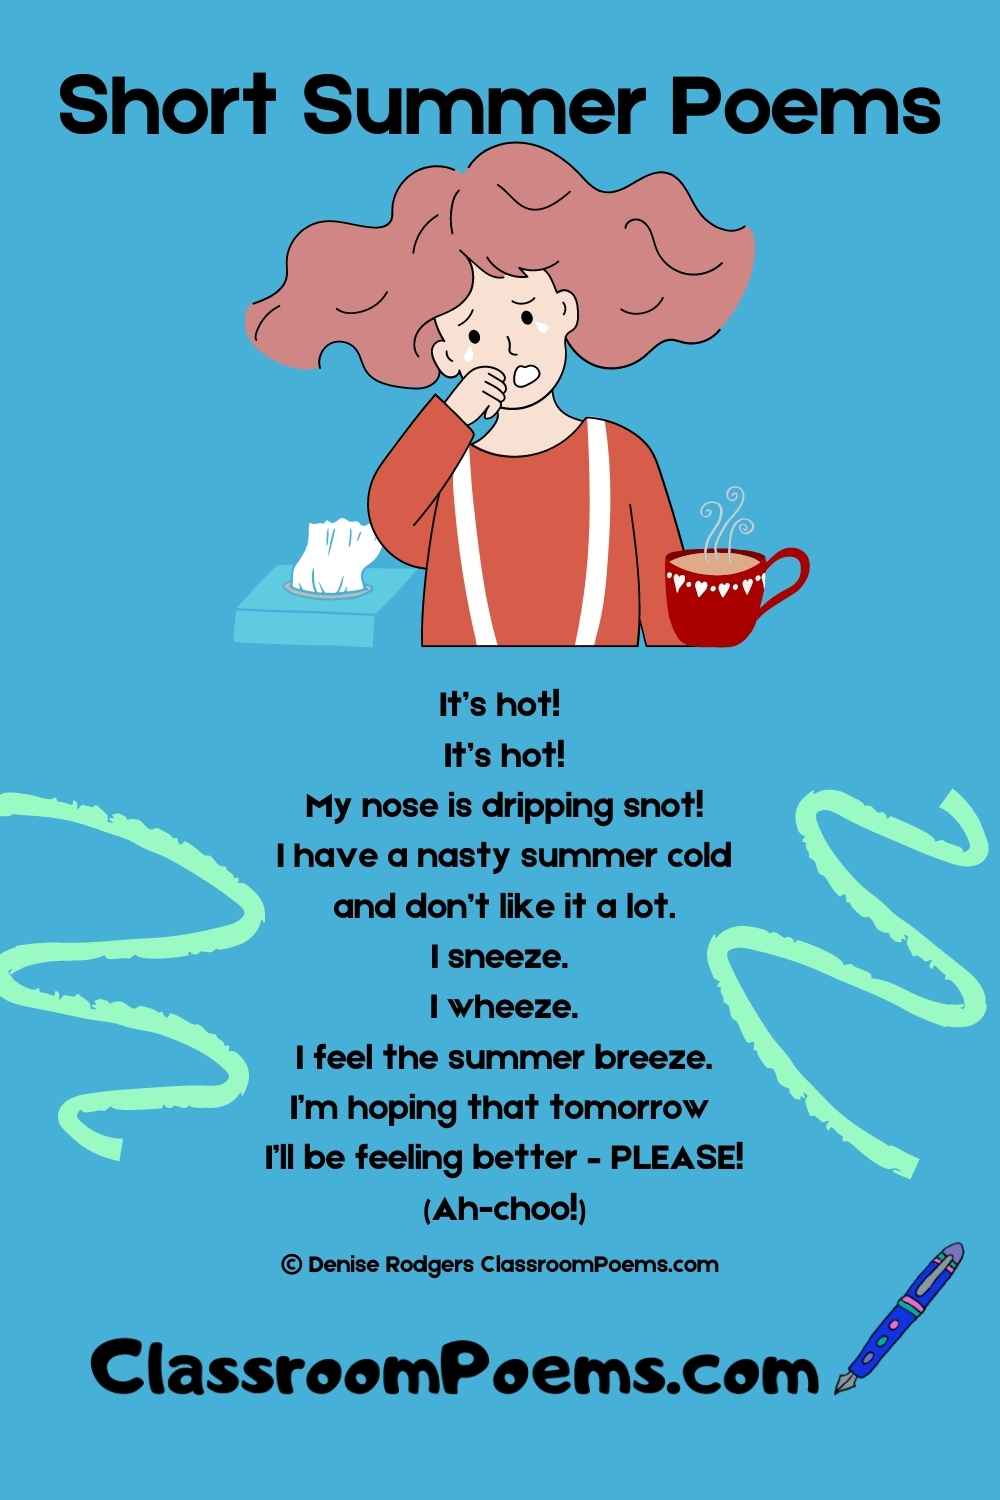 Summer poem about a summer cold by Denise Rodgers on ClassroomPoems.com.